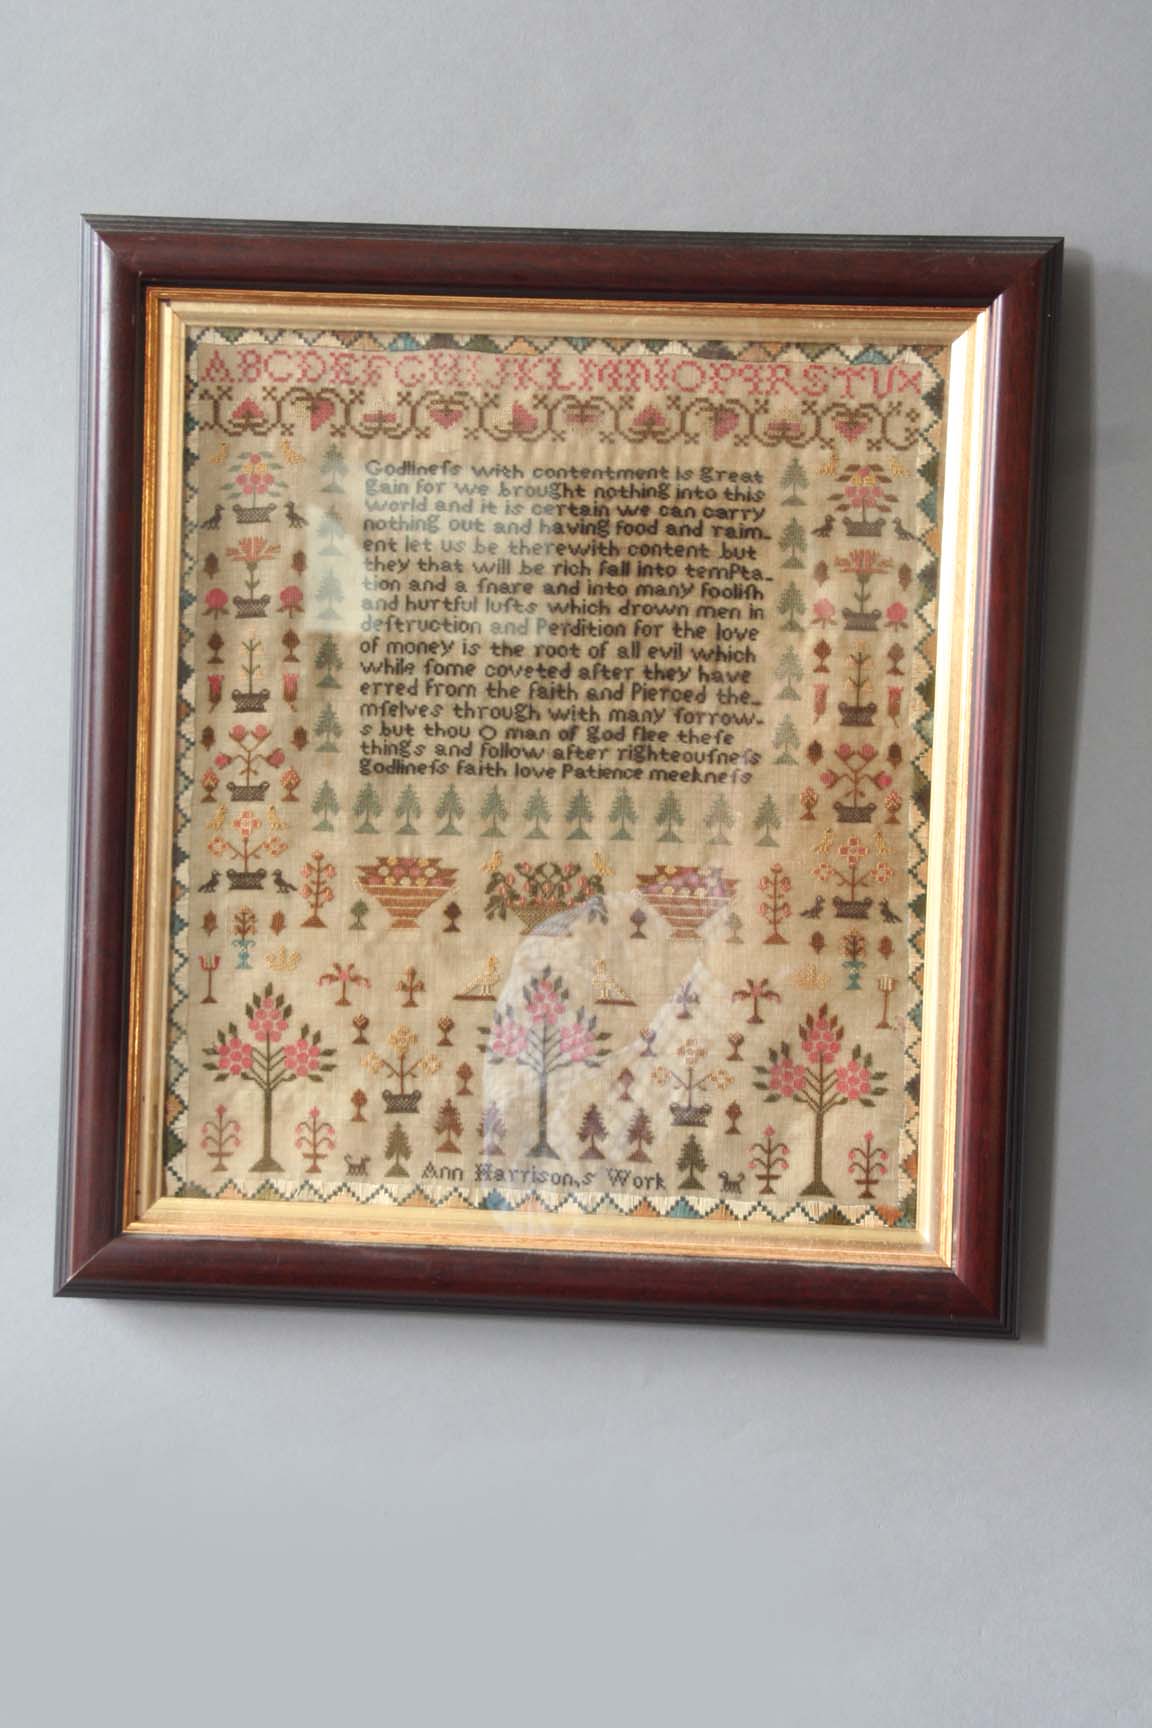 A NEEDLEWORK SAMPLER worked with a text and flowering plants by Ann Harrison, 13ins.(33cms.) x 11